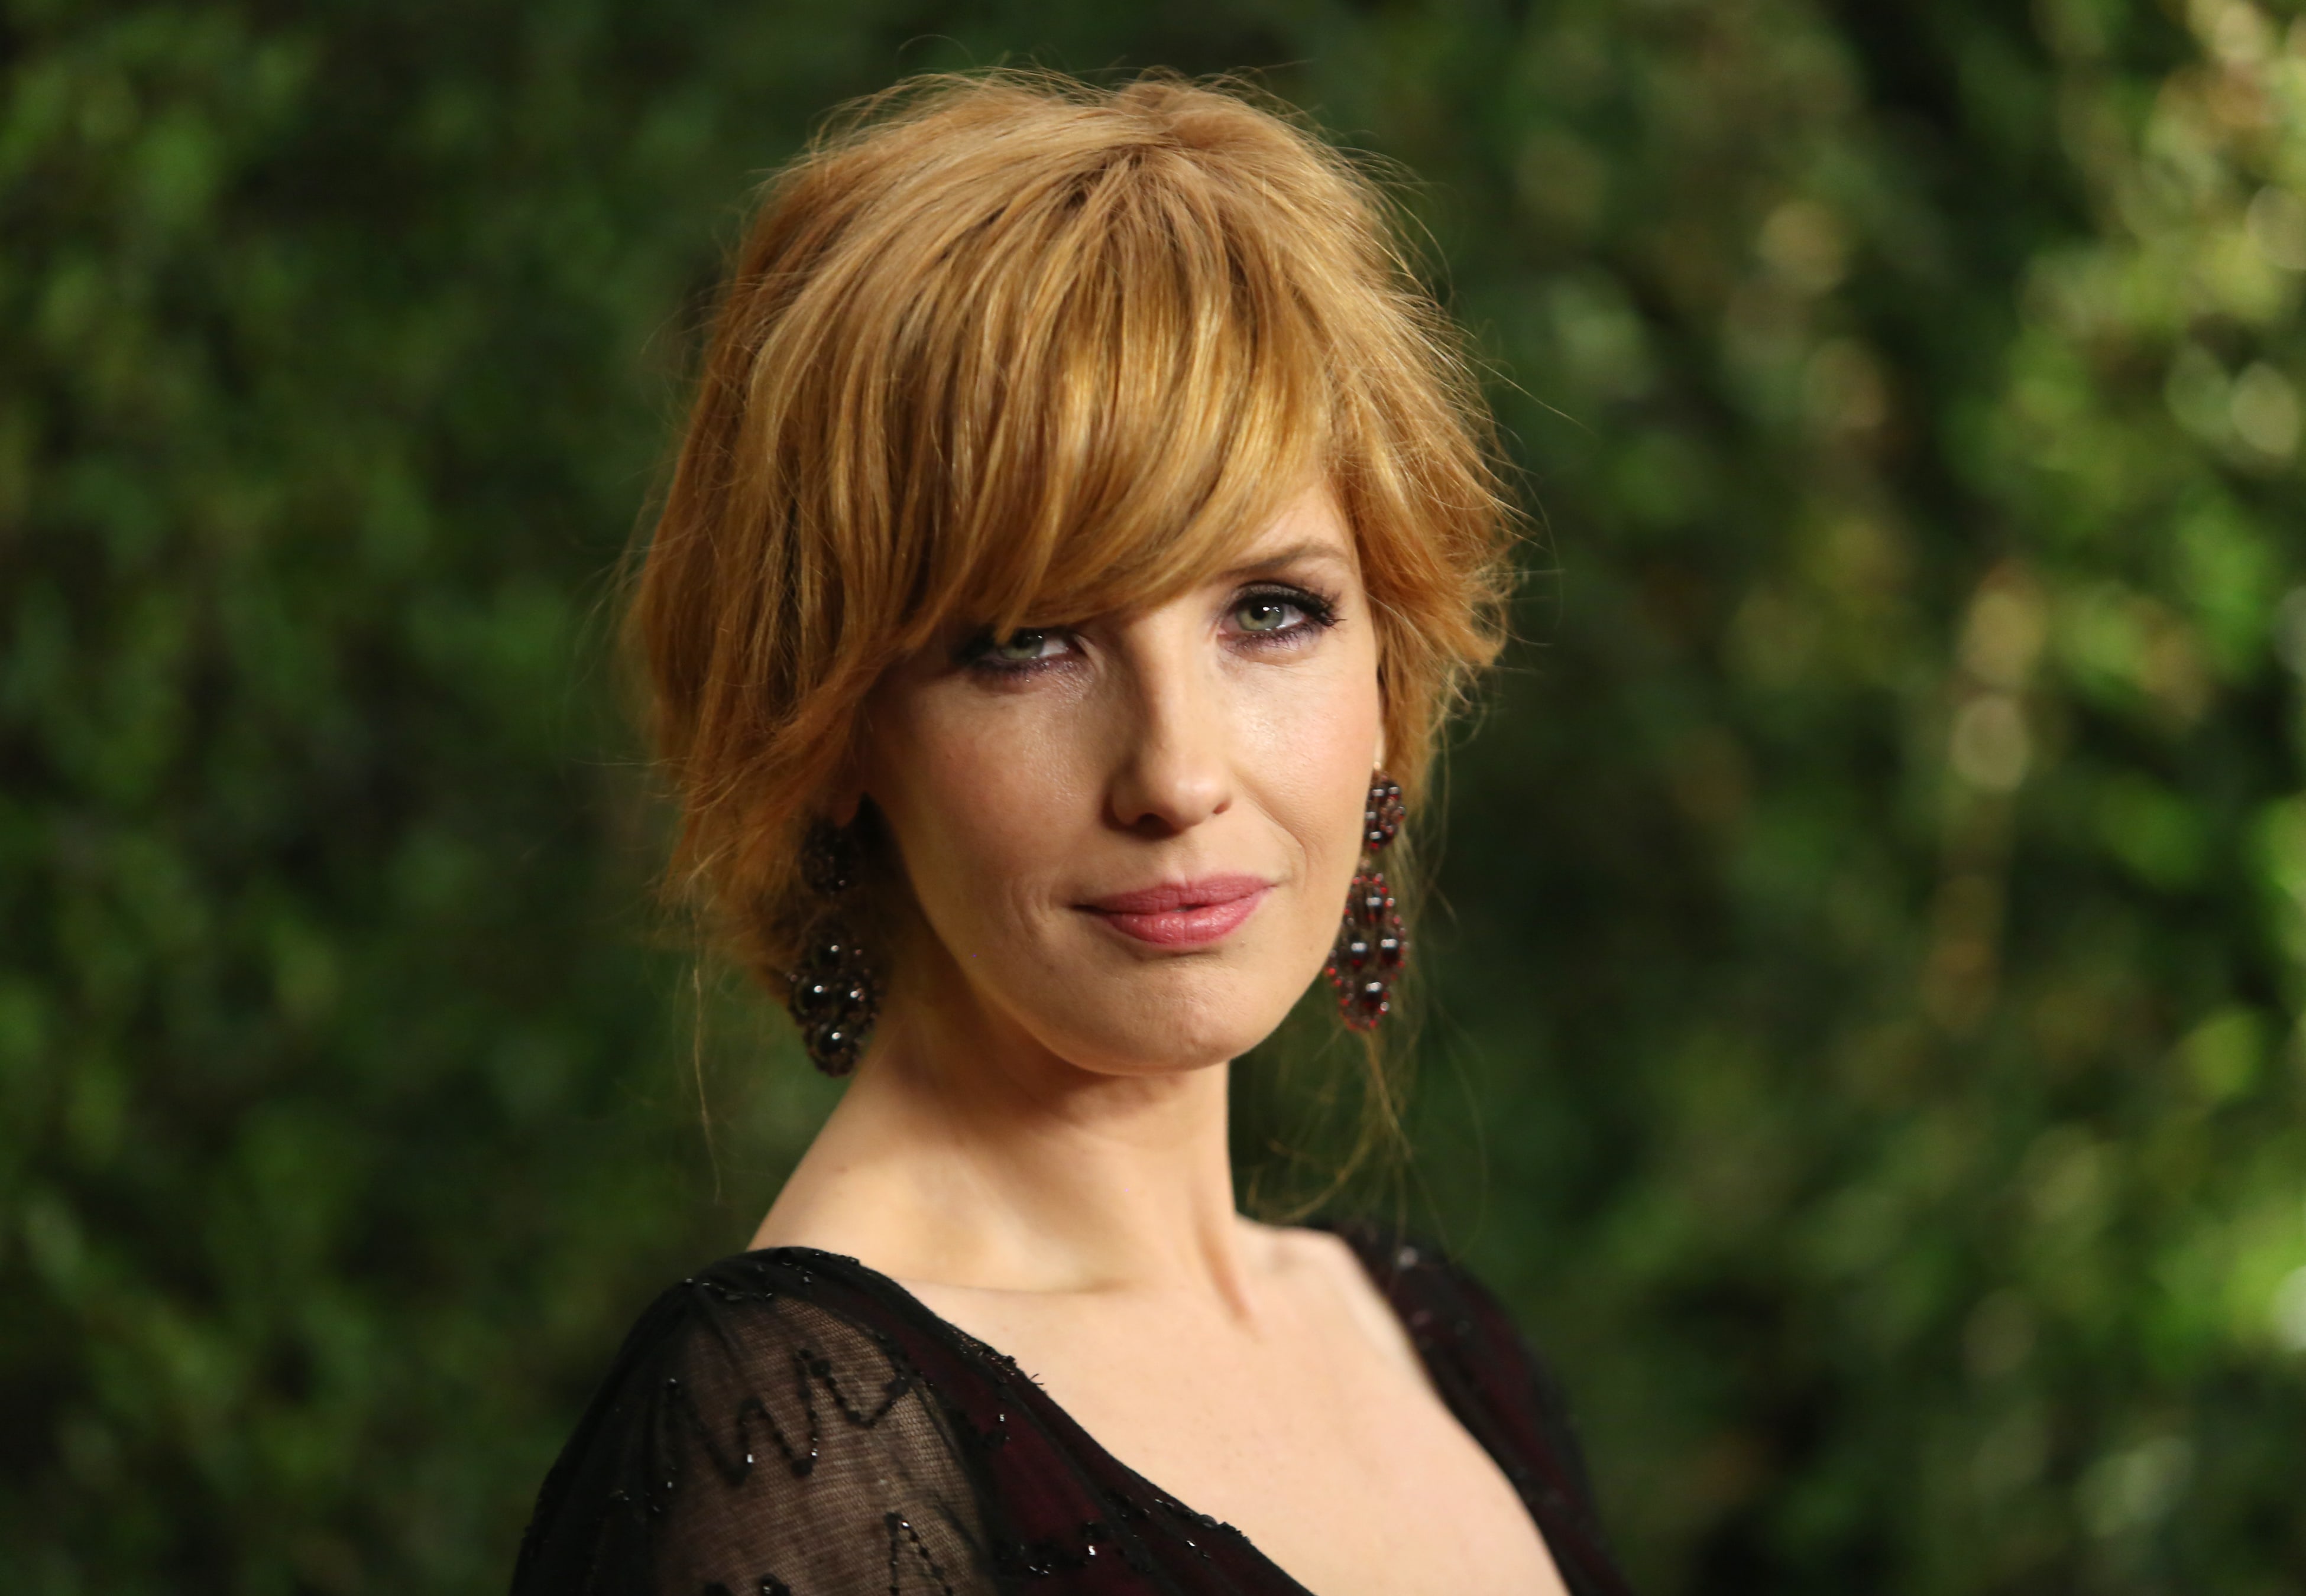 Reilly pics kelly Kelly Reilly